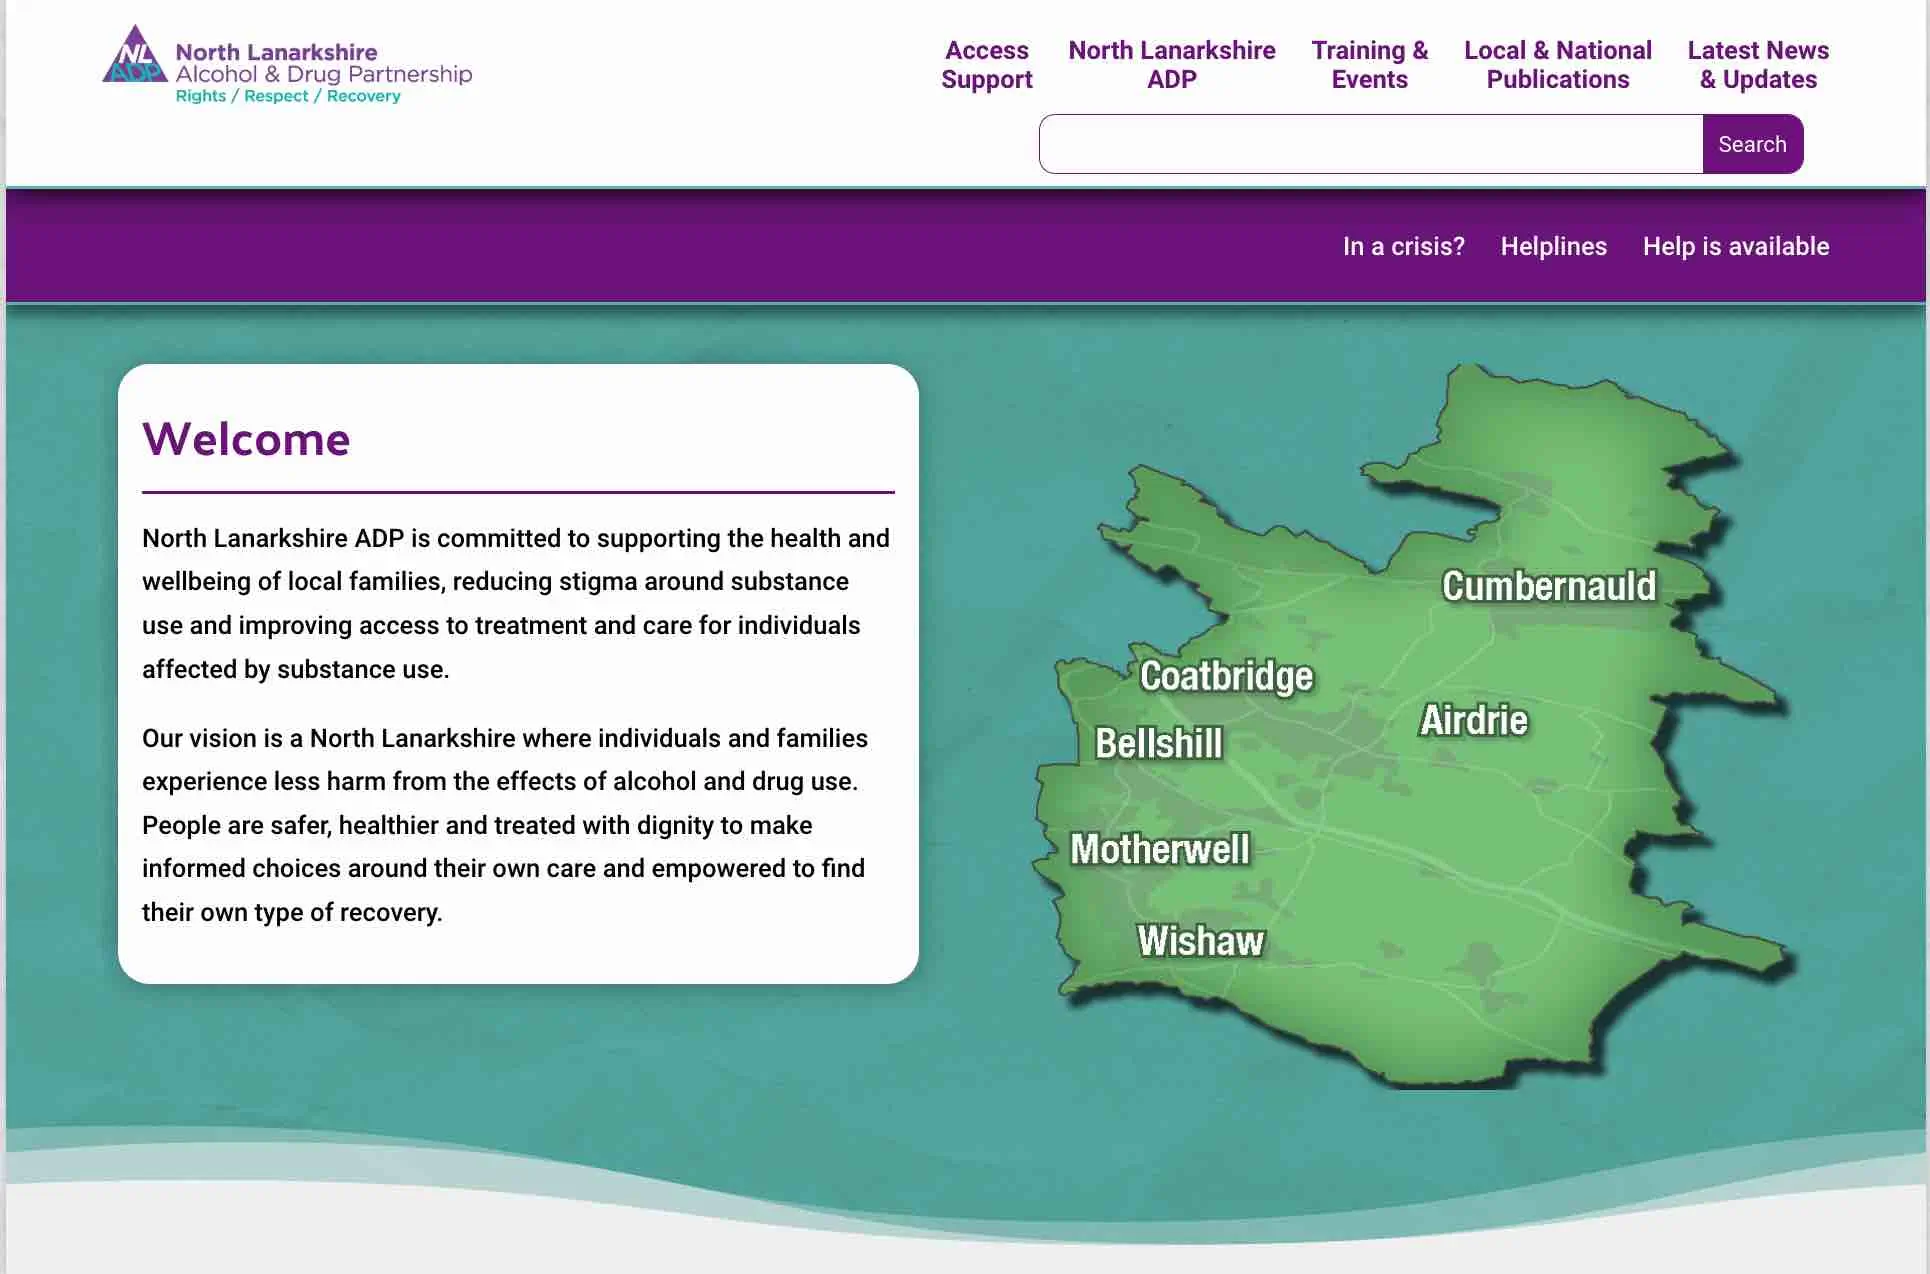 The home page pf the North Lanarkshire Alcohol & Drug Partnership website.